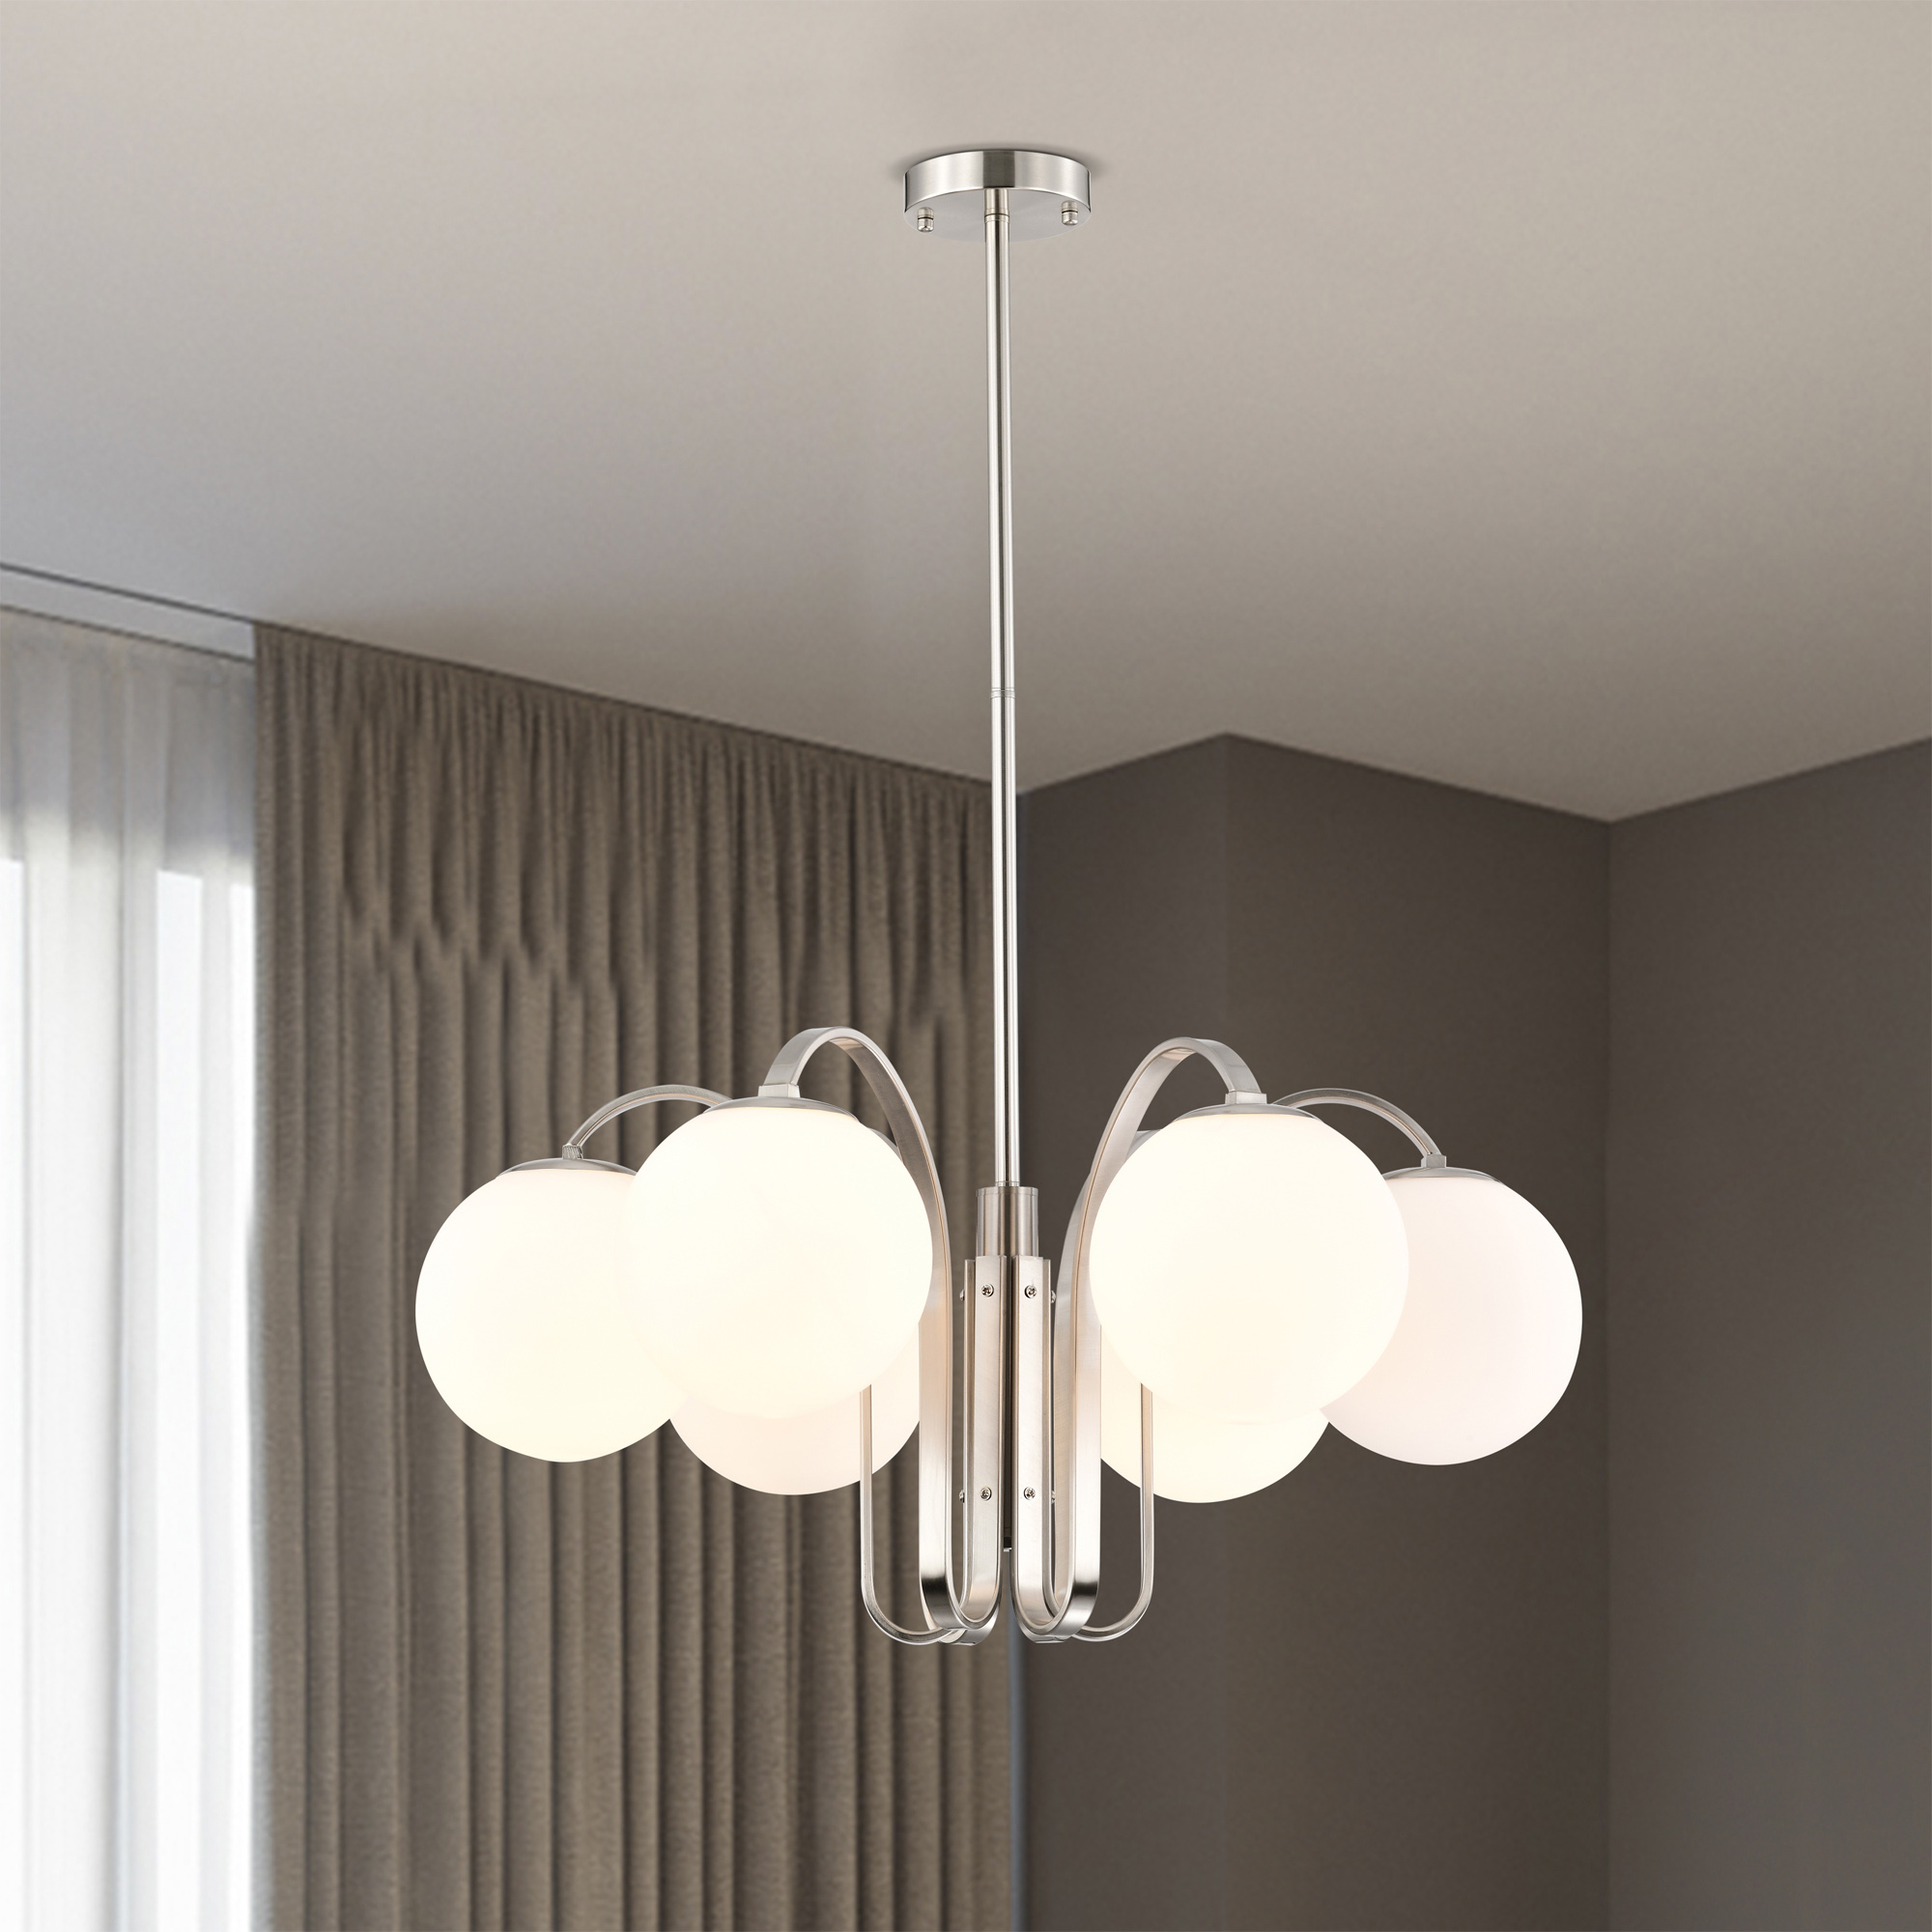 Aran 28 in. 6-Light Indoor Polished Silver Finish Chandelier with Light Kit